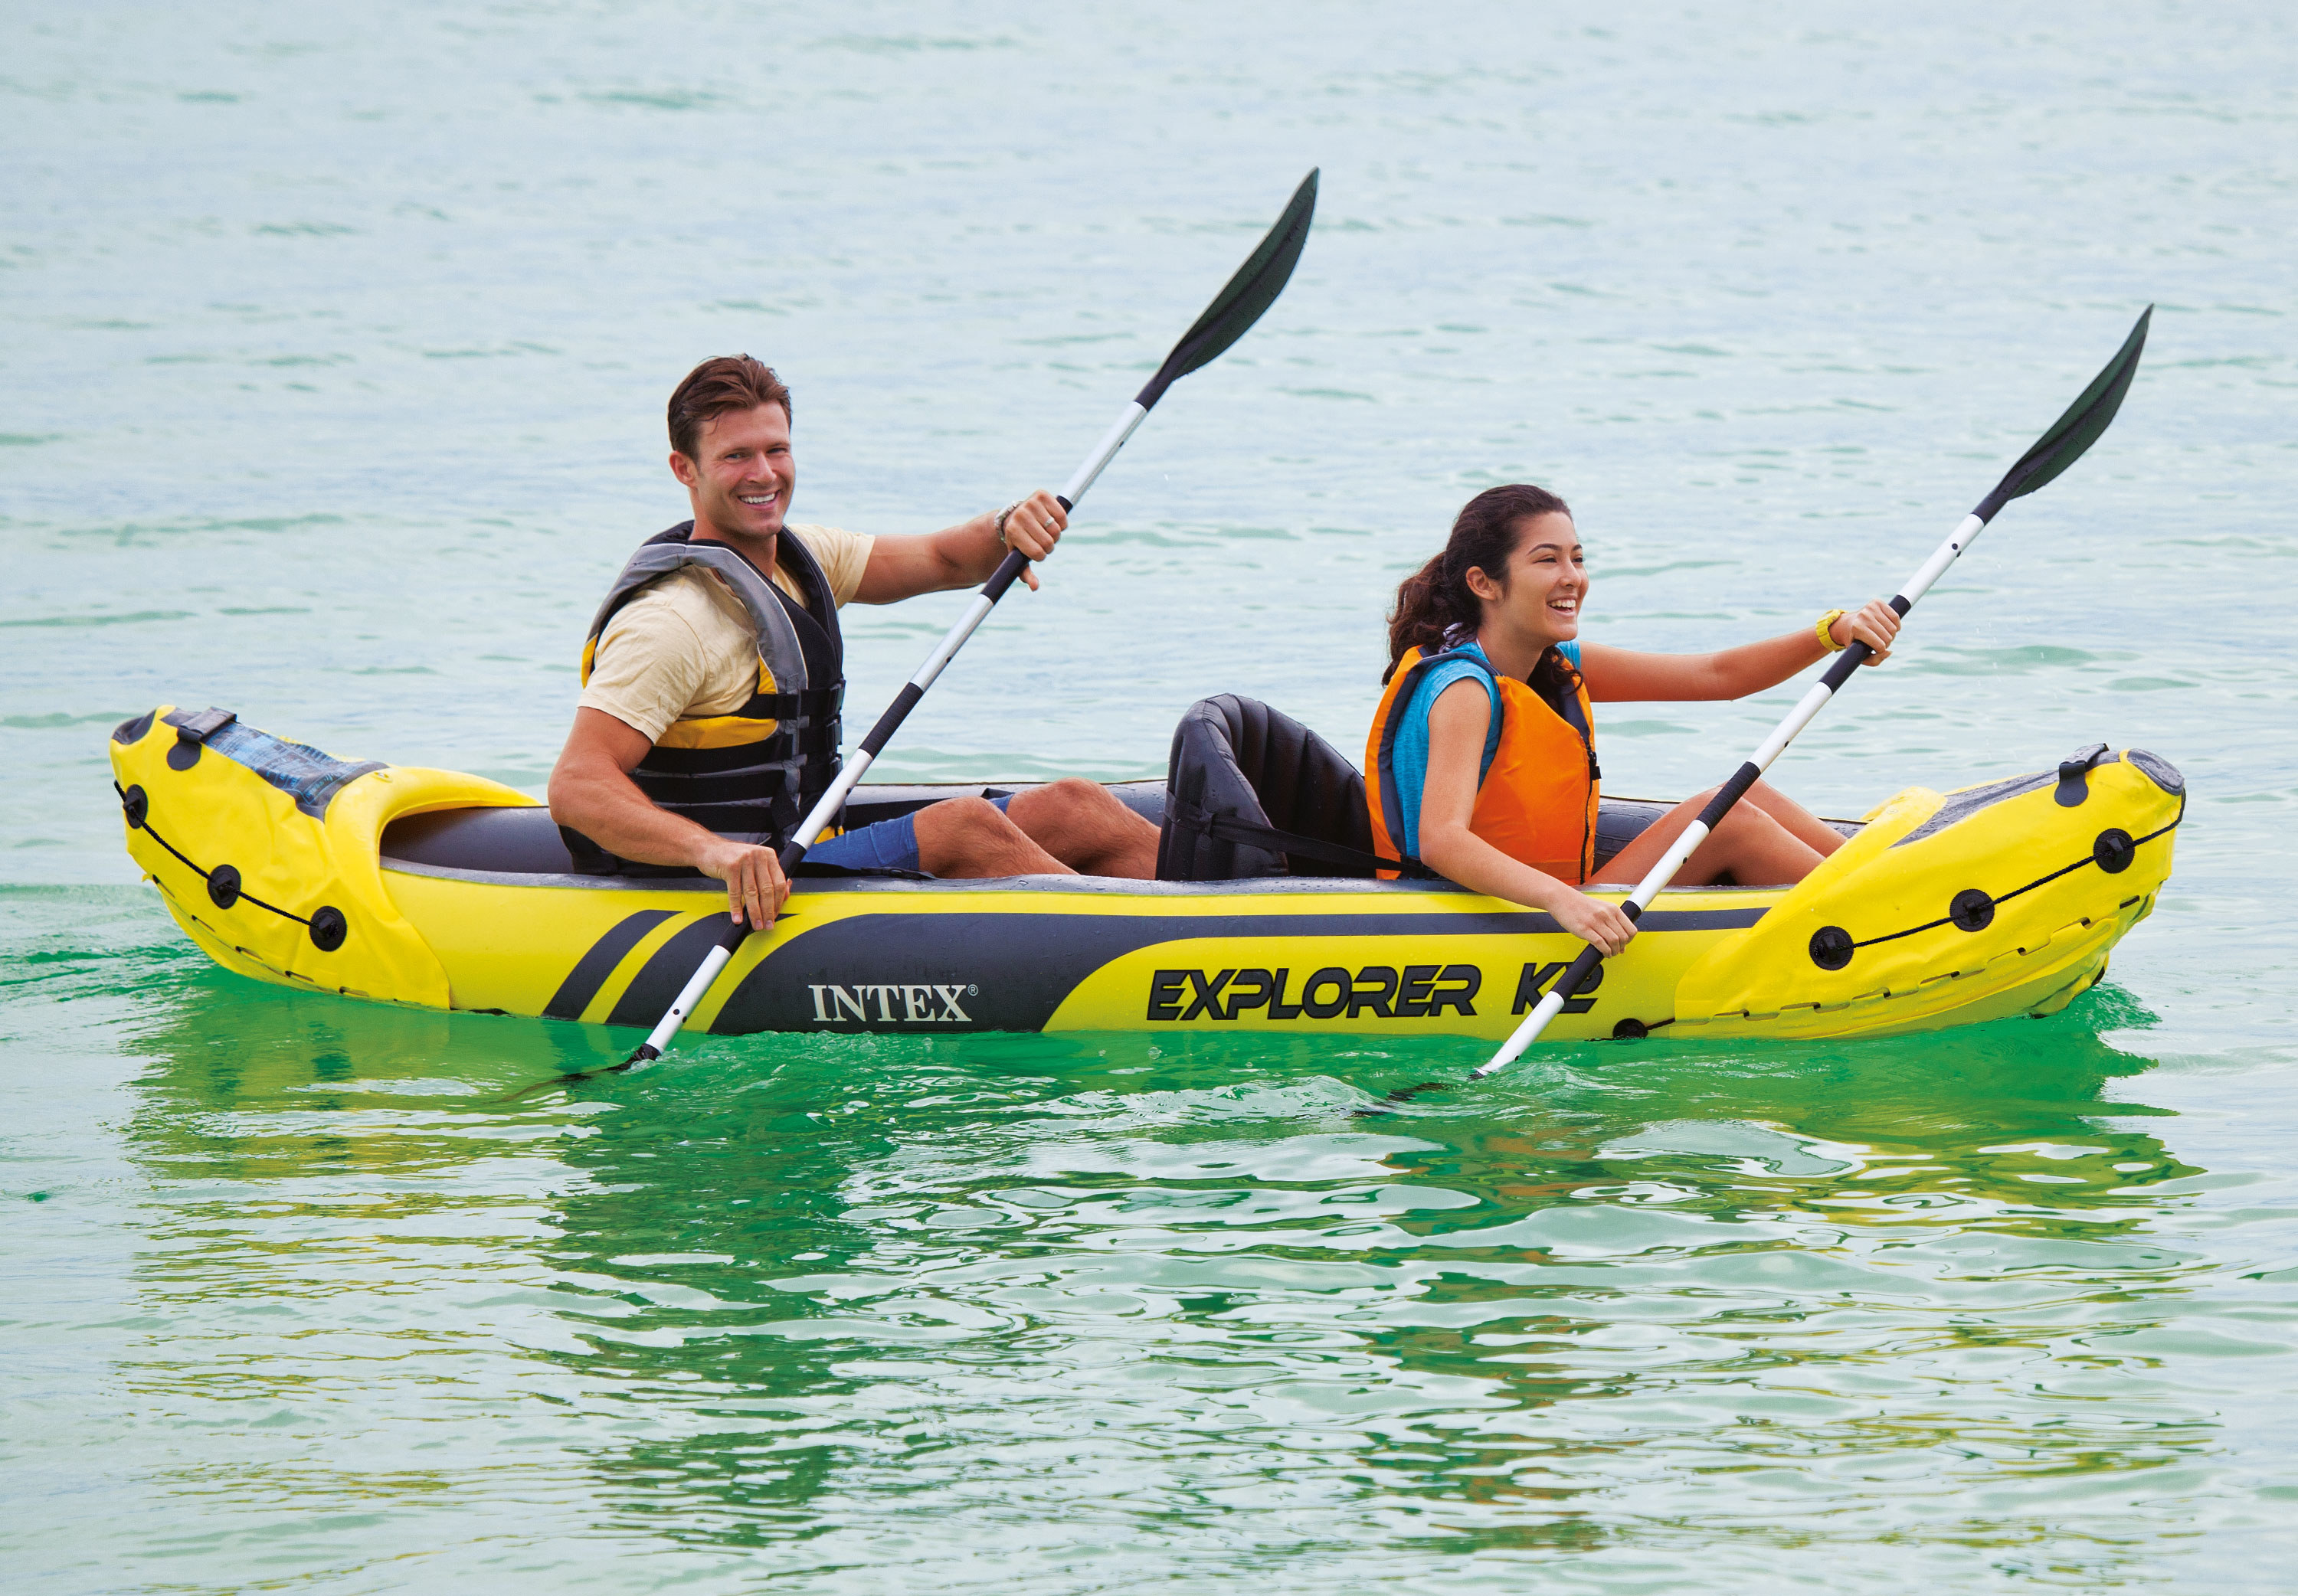 two people in the inflated kayak on a body of water